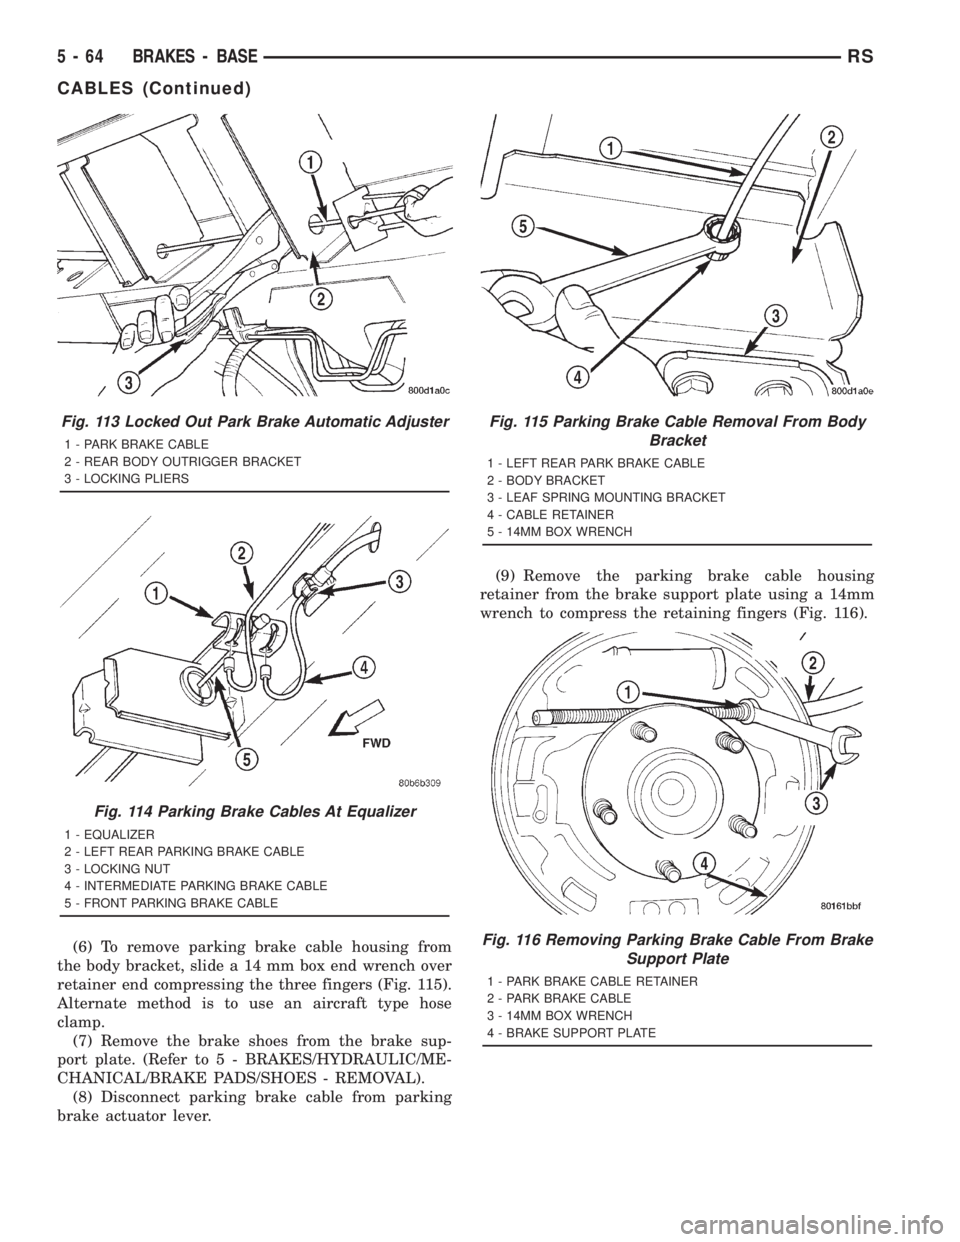 CHRYSLER VOYAGER 2001  Service Manual (6) To remove parking brake cable housing from
the body bracket, slide a 14 mm box end wrench over
retainer end compressing the three fingers (Fig. 115).
Alternate method is to use an aircraft type ho